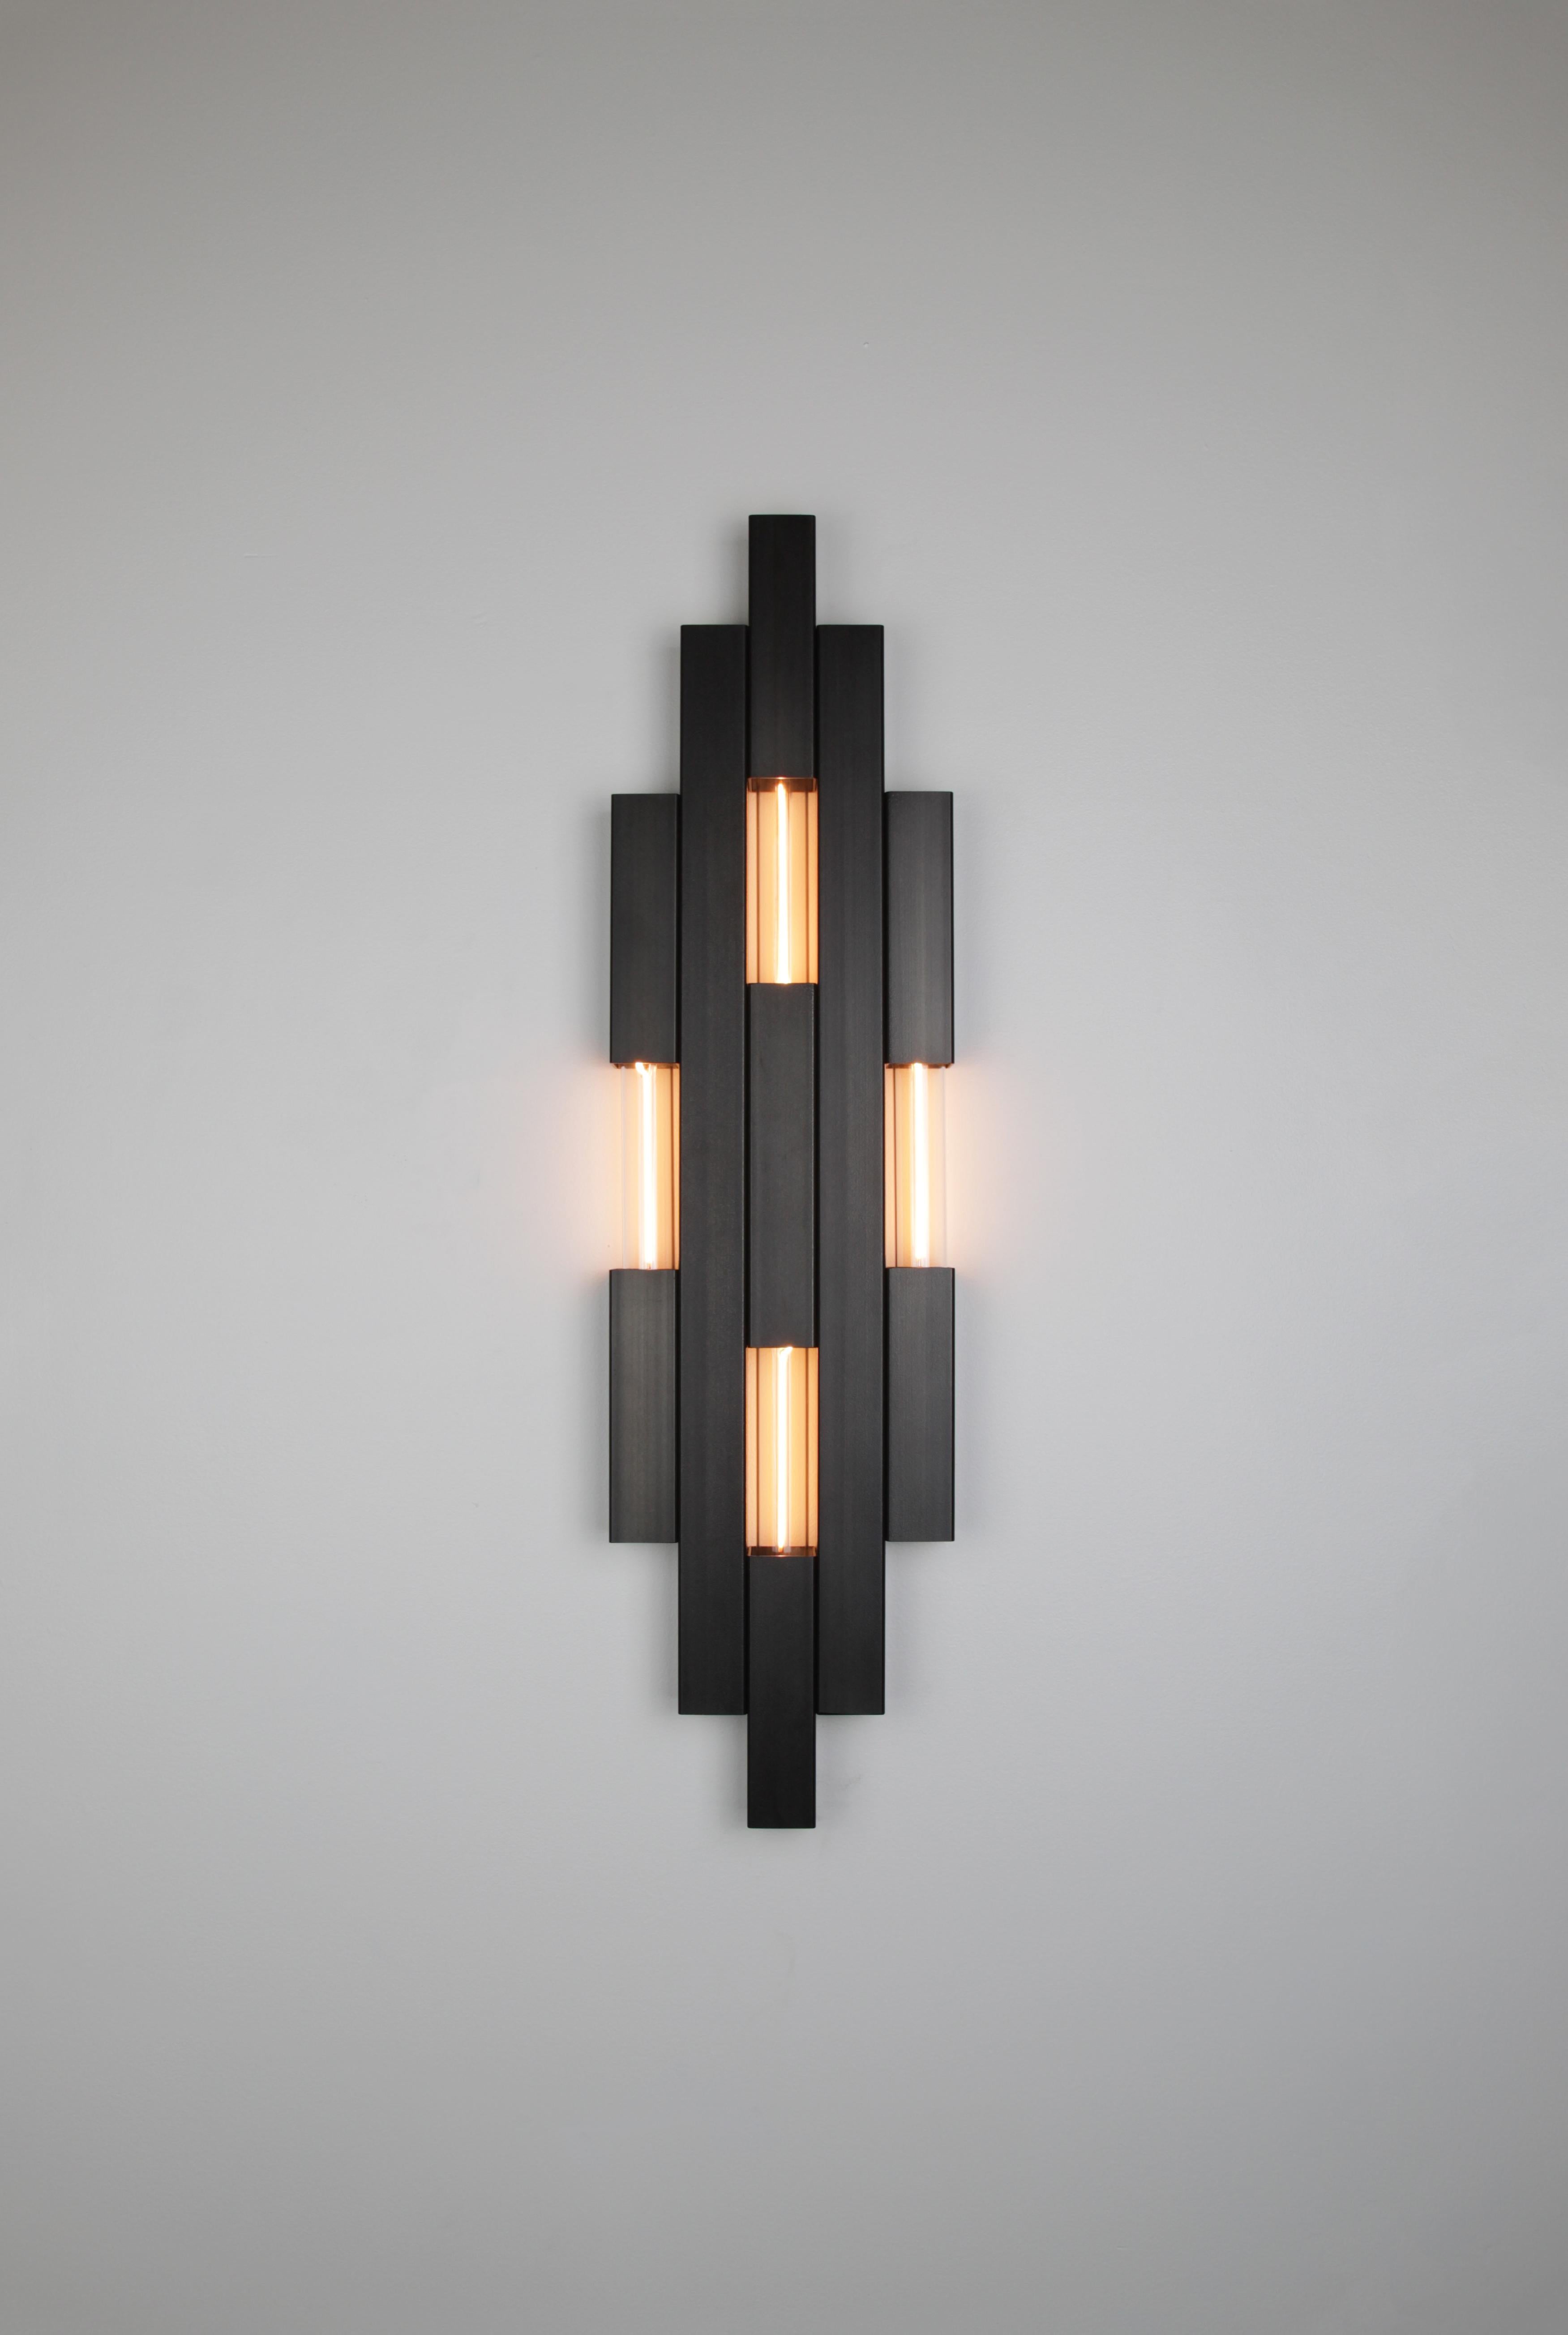 Nouveau Sconce  Daikon - Steel

material options: steel, brass, stainless steel (please message for brass or stainless price)

finish options: 
steel- Industrial clear, onyx black wax, satin black, satin white
brass- brushed brass, aged brass, naval